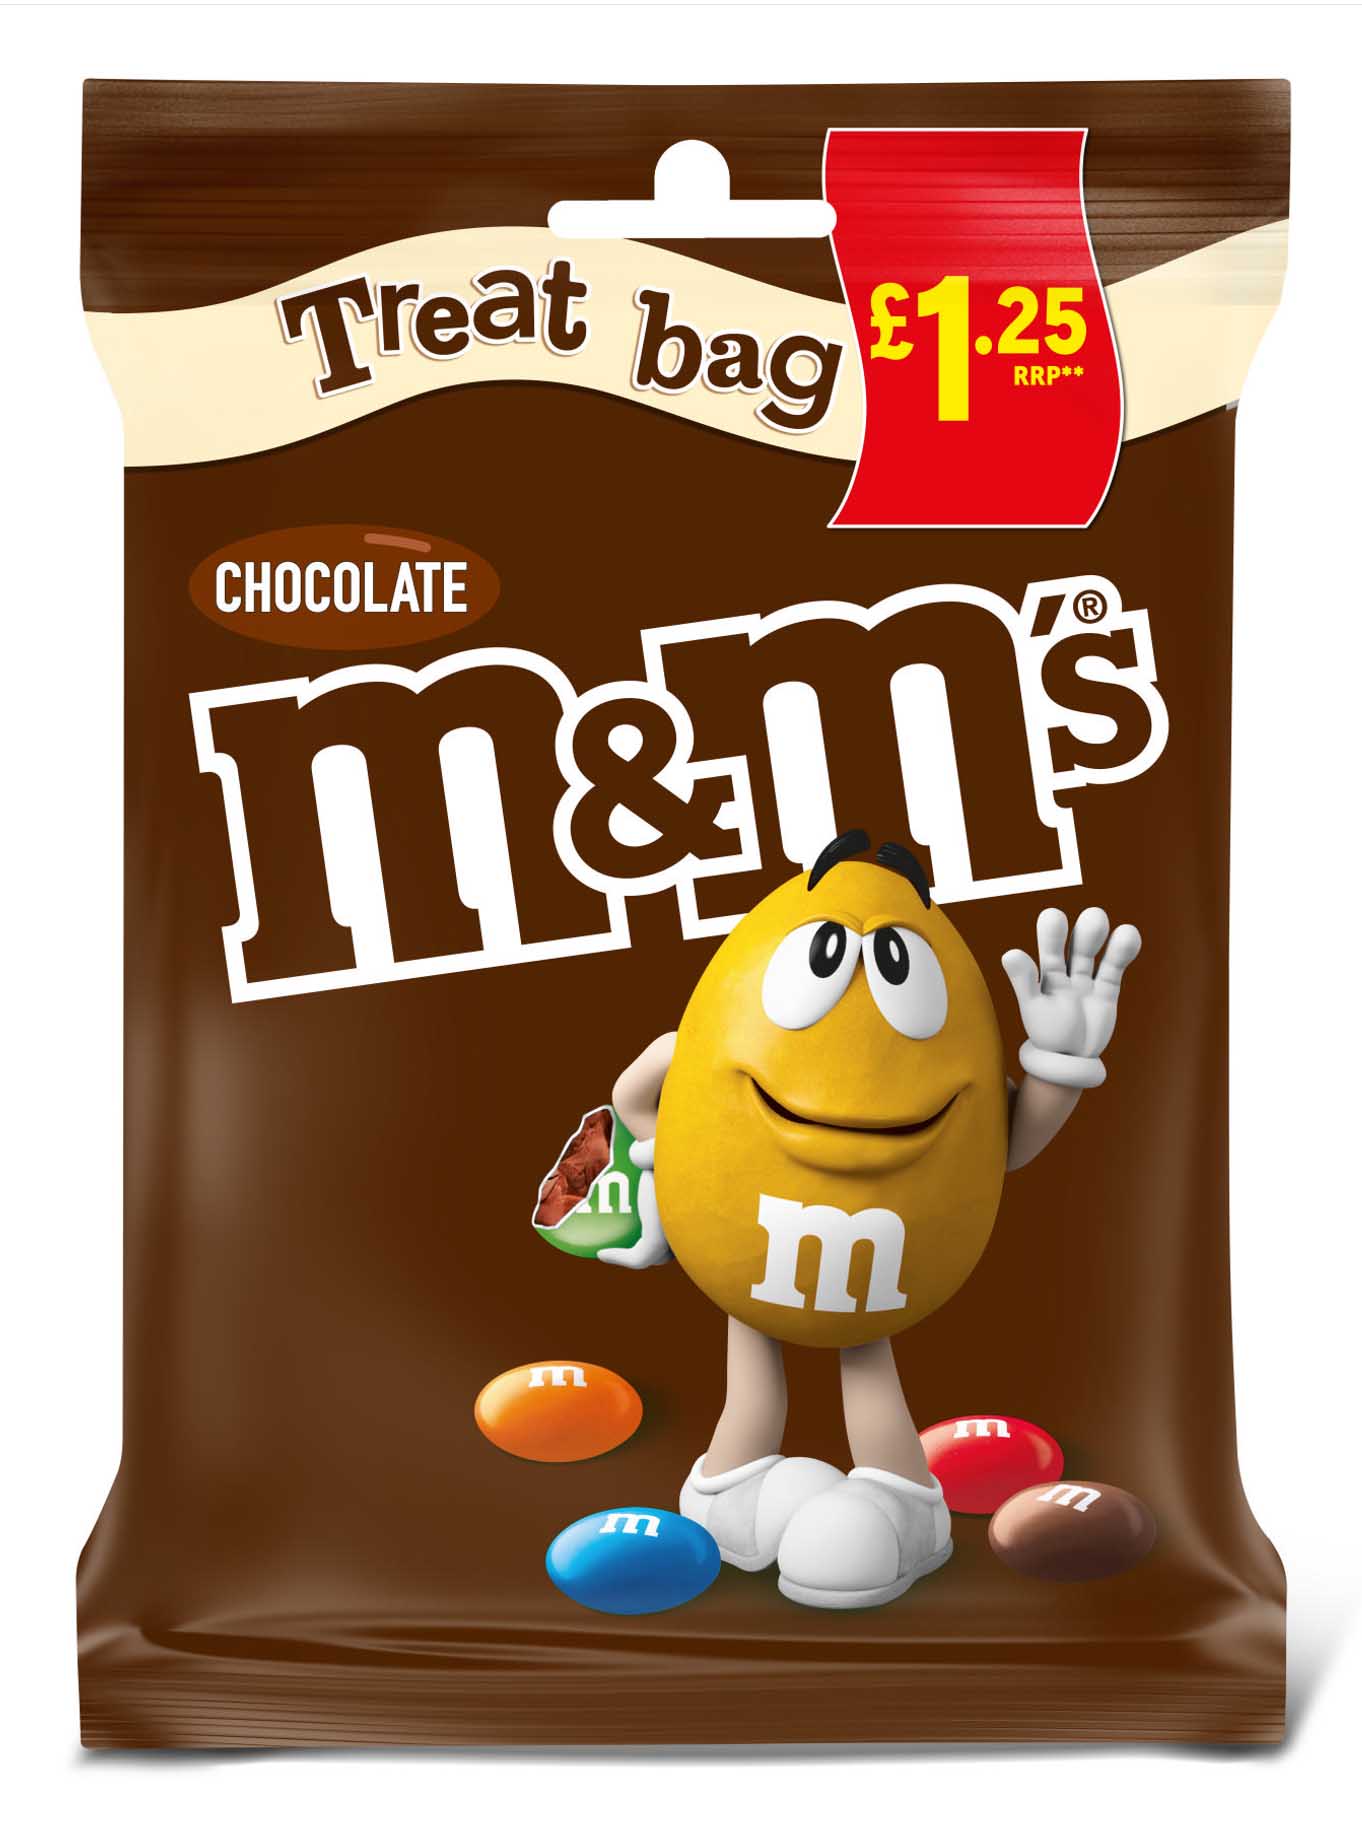 M&M's Crunchy Caramel Chocolate Pouch Bag 109g - We Get Any Stock